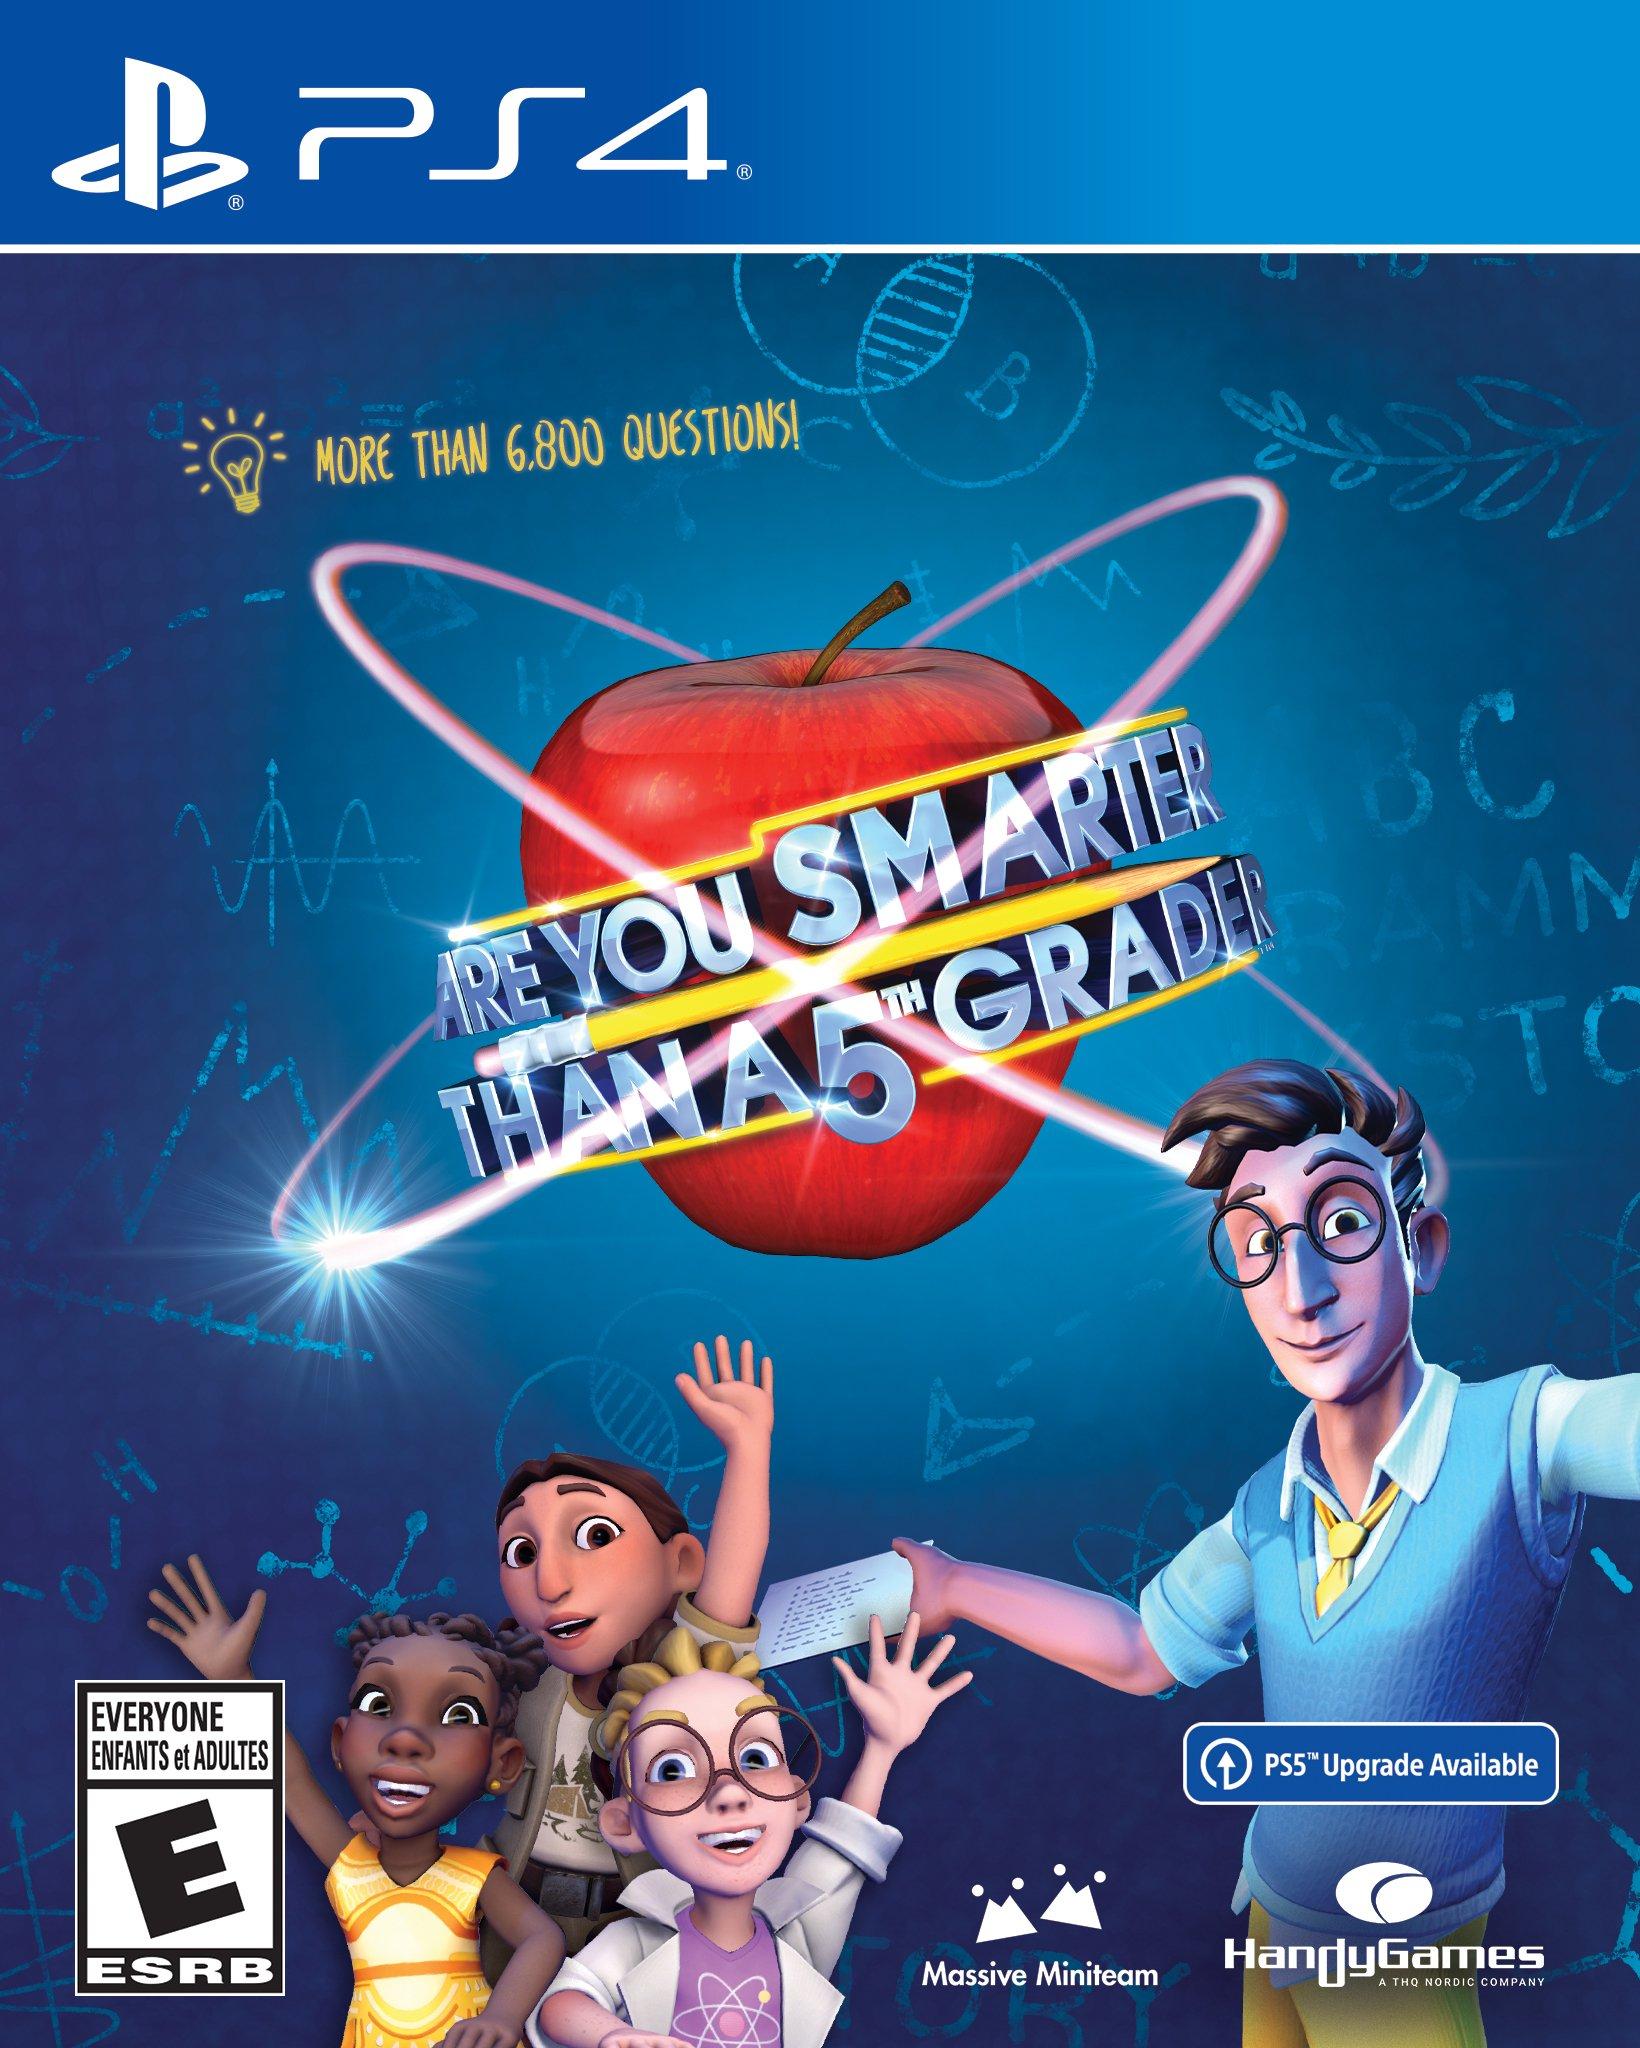 THQ Are You Smarter Than A 5th Grader PS4 Playstation 4 Game